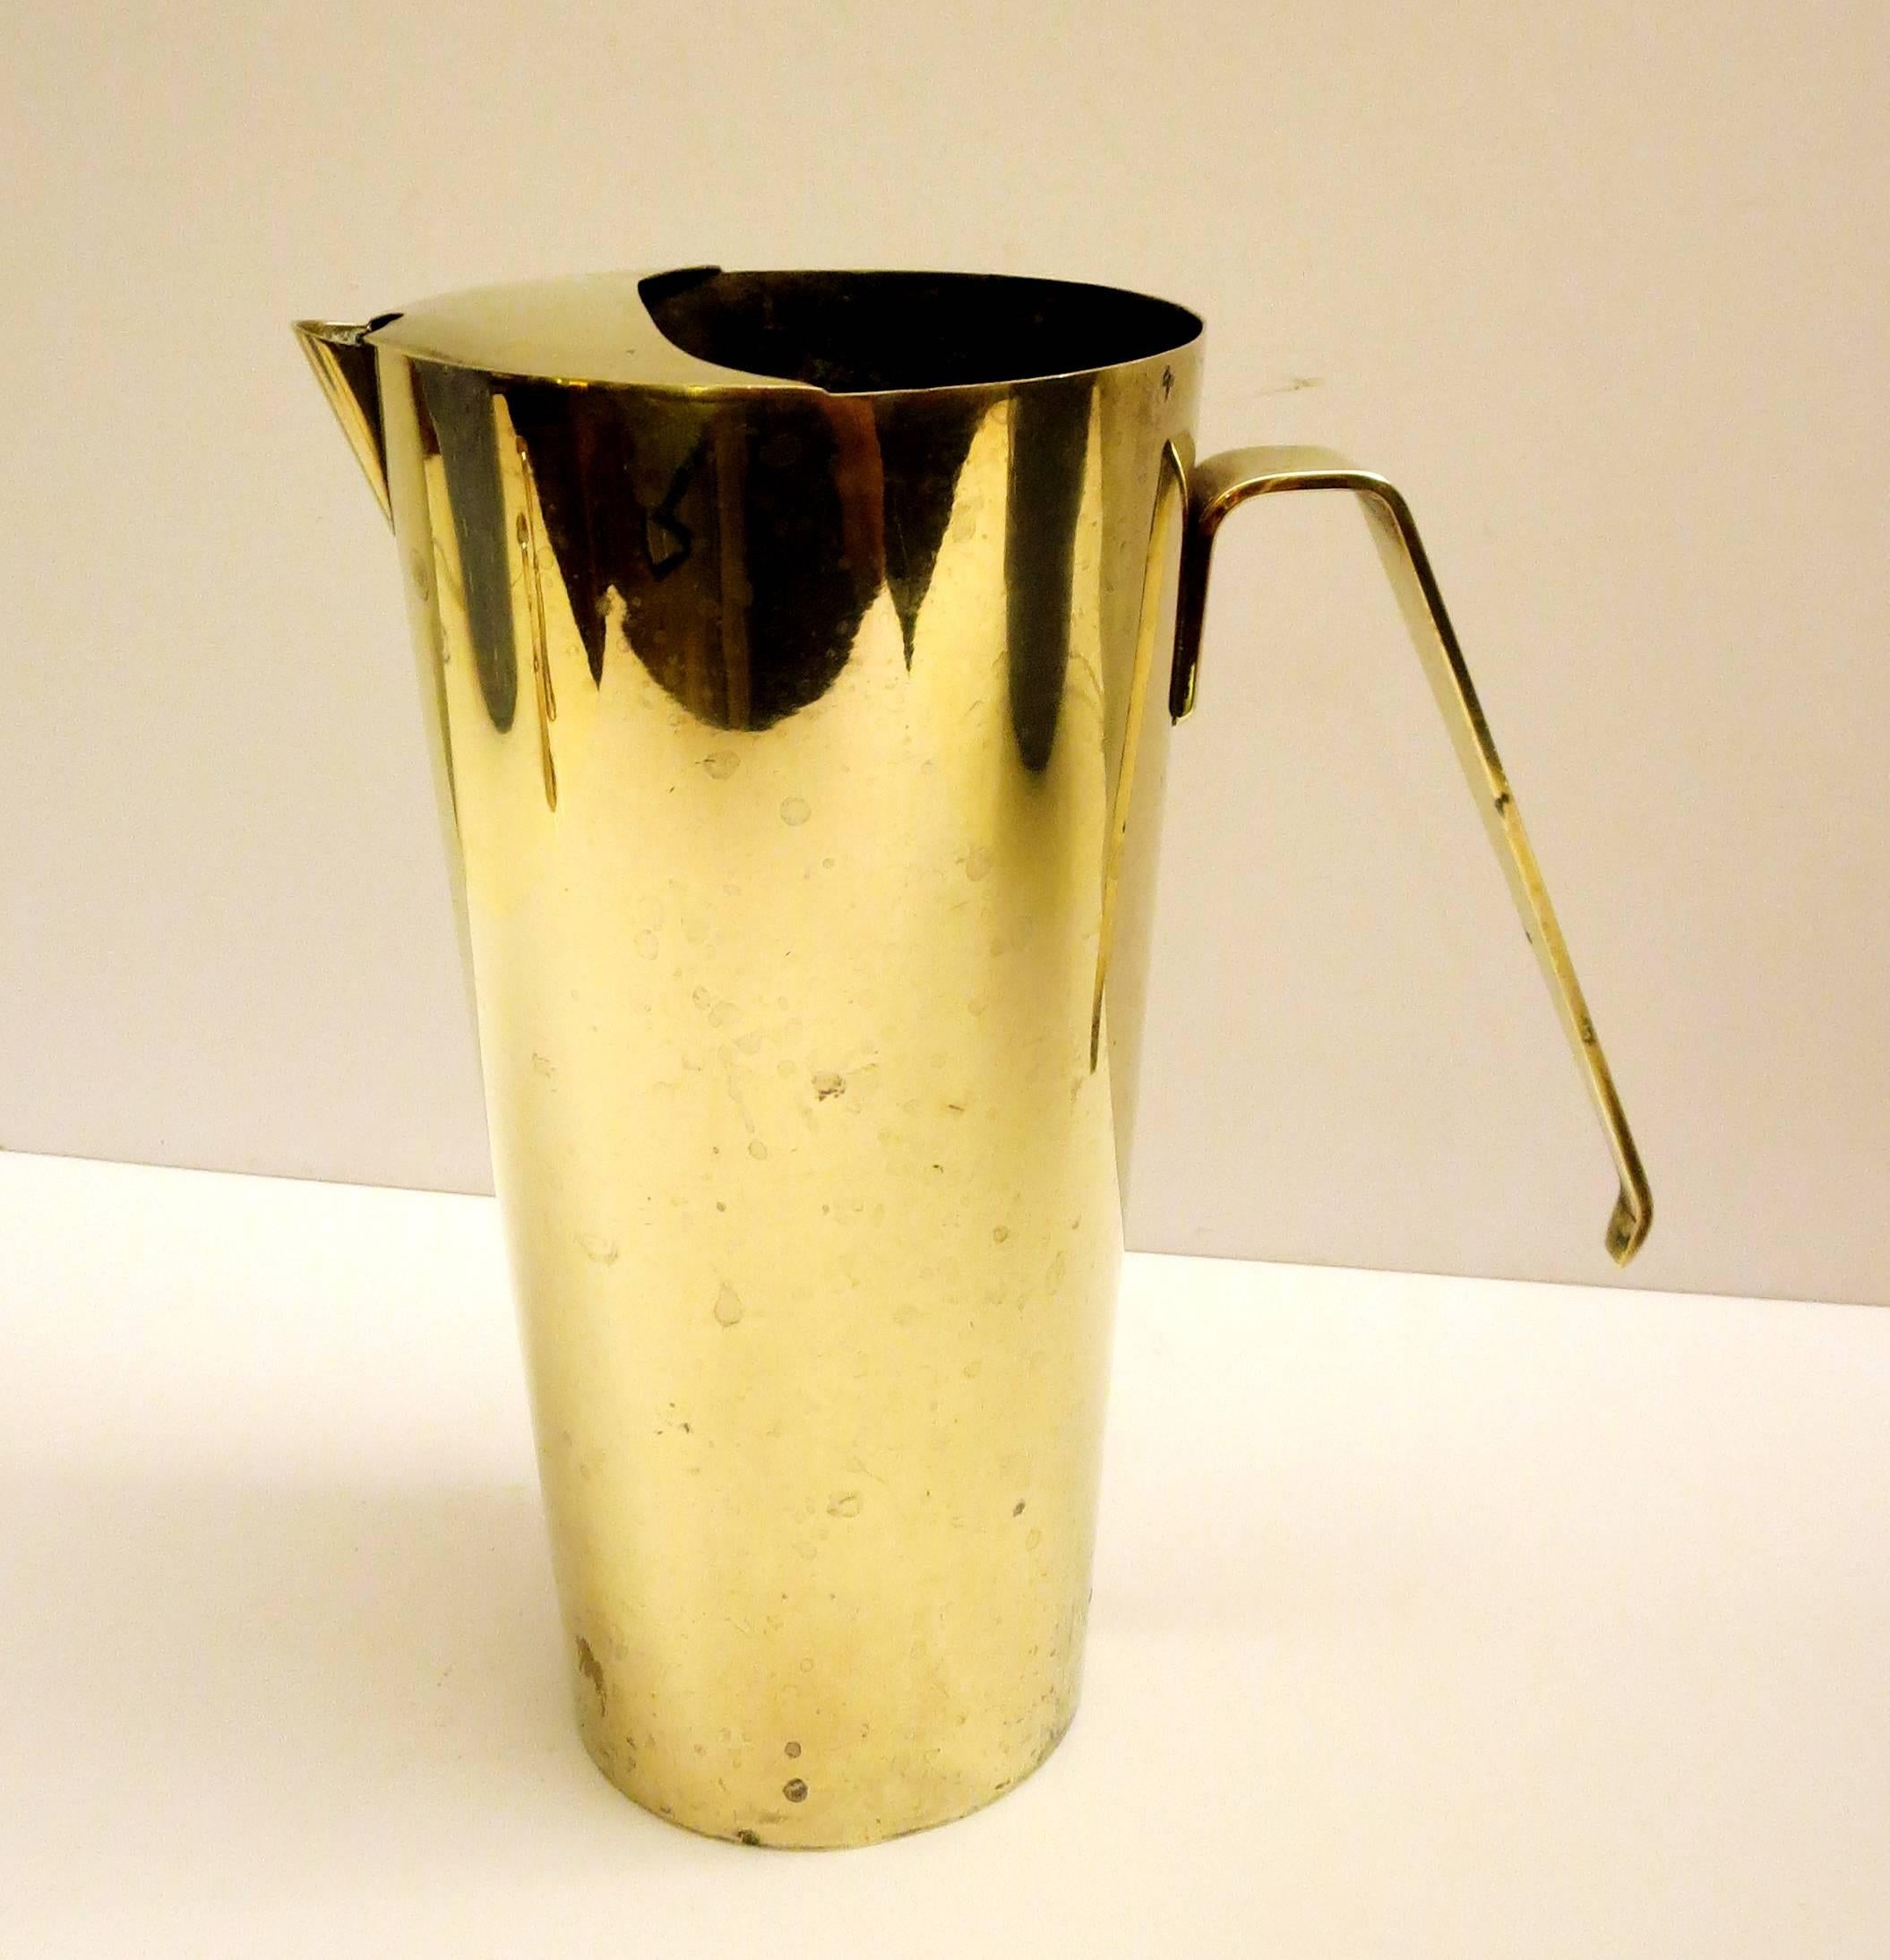 A very unique solid polished brass Italian water pitcher, circa 1950s great design I polished the outside but left a bit of wear, its simple elegant nice handle, very nice condition with no dings.